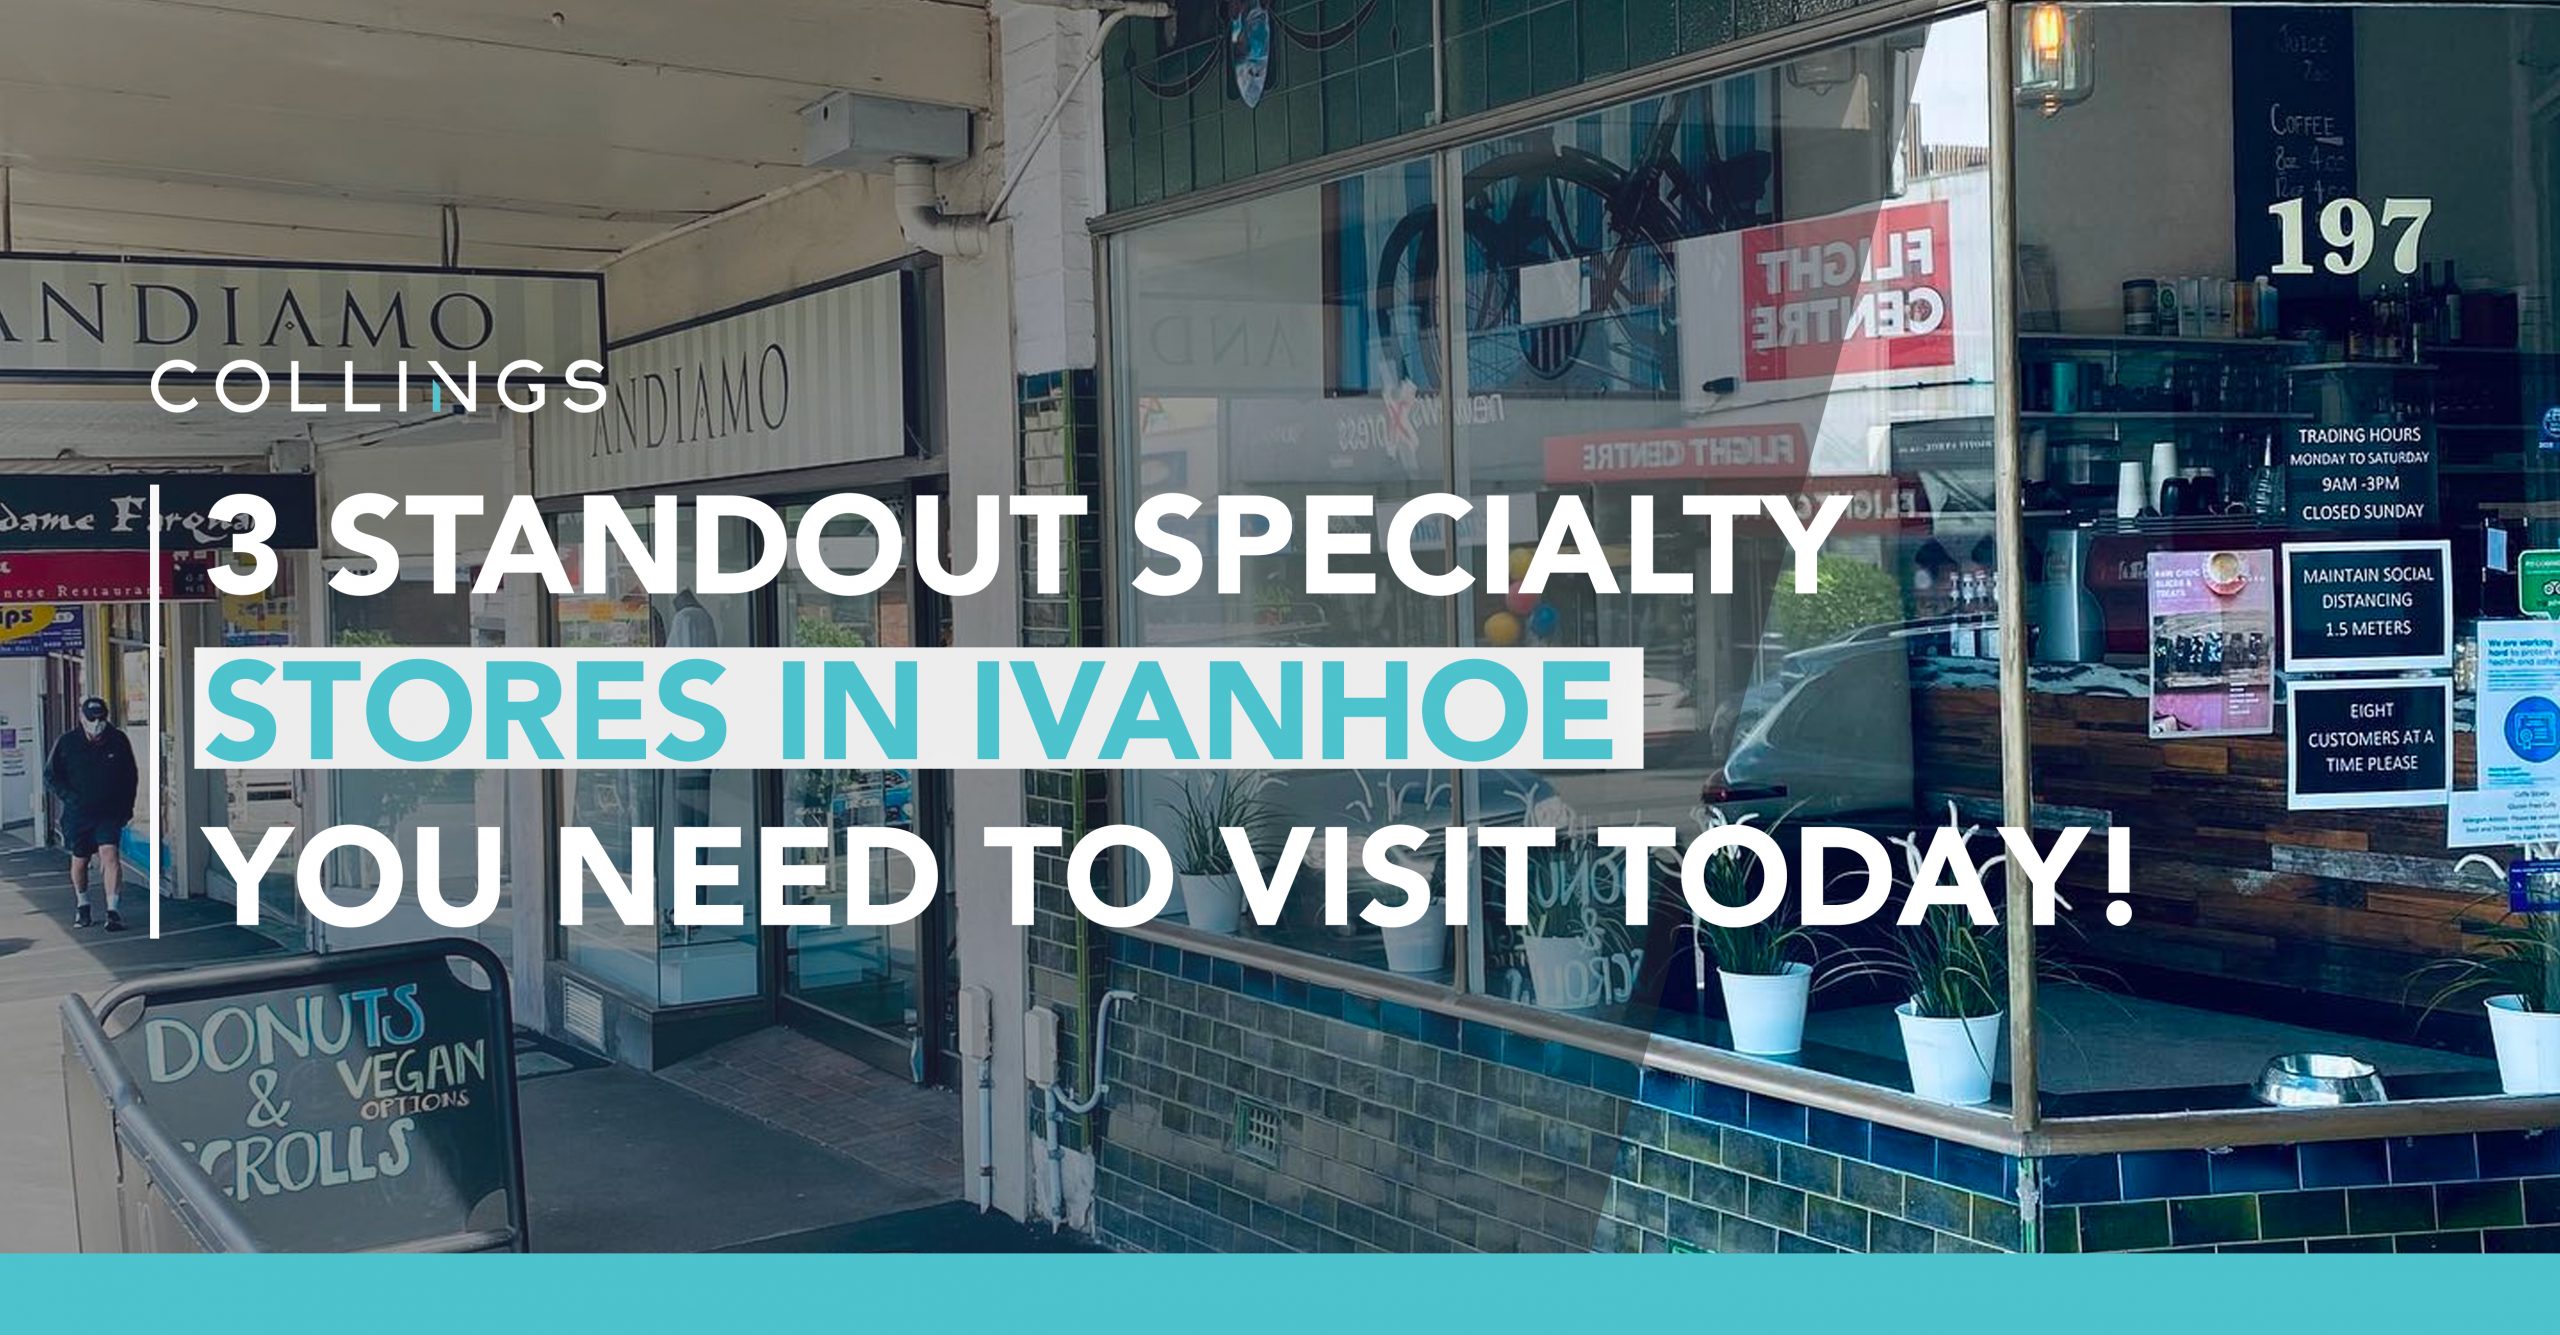 Standout specialty stores in Ivanhoe you need to visit today